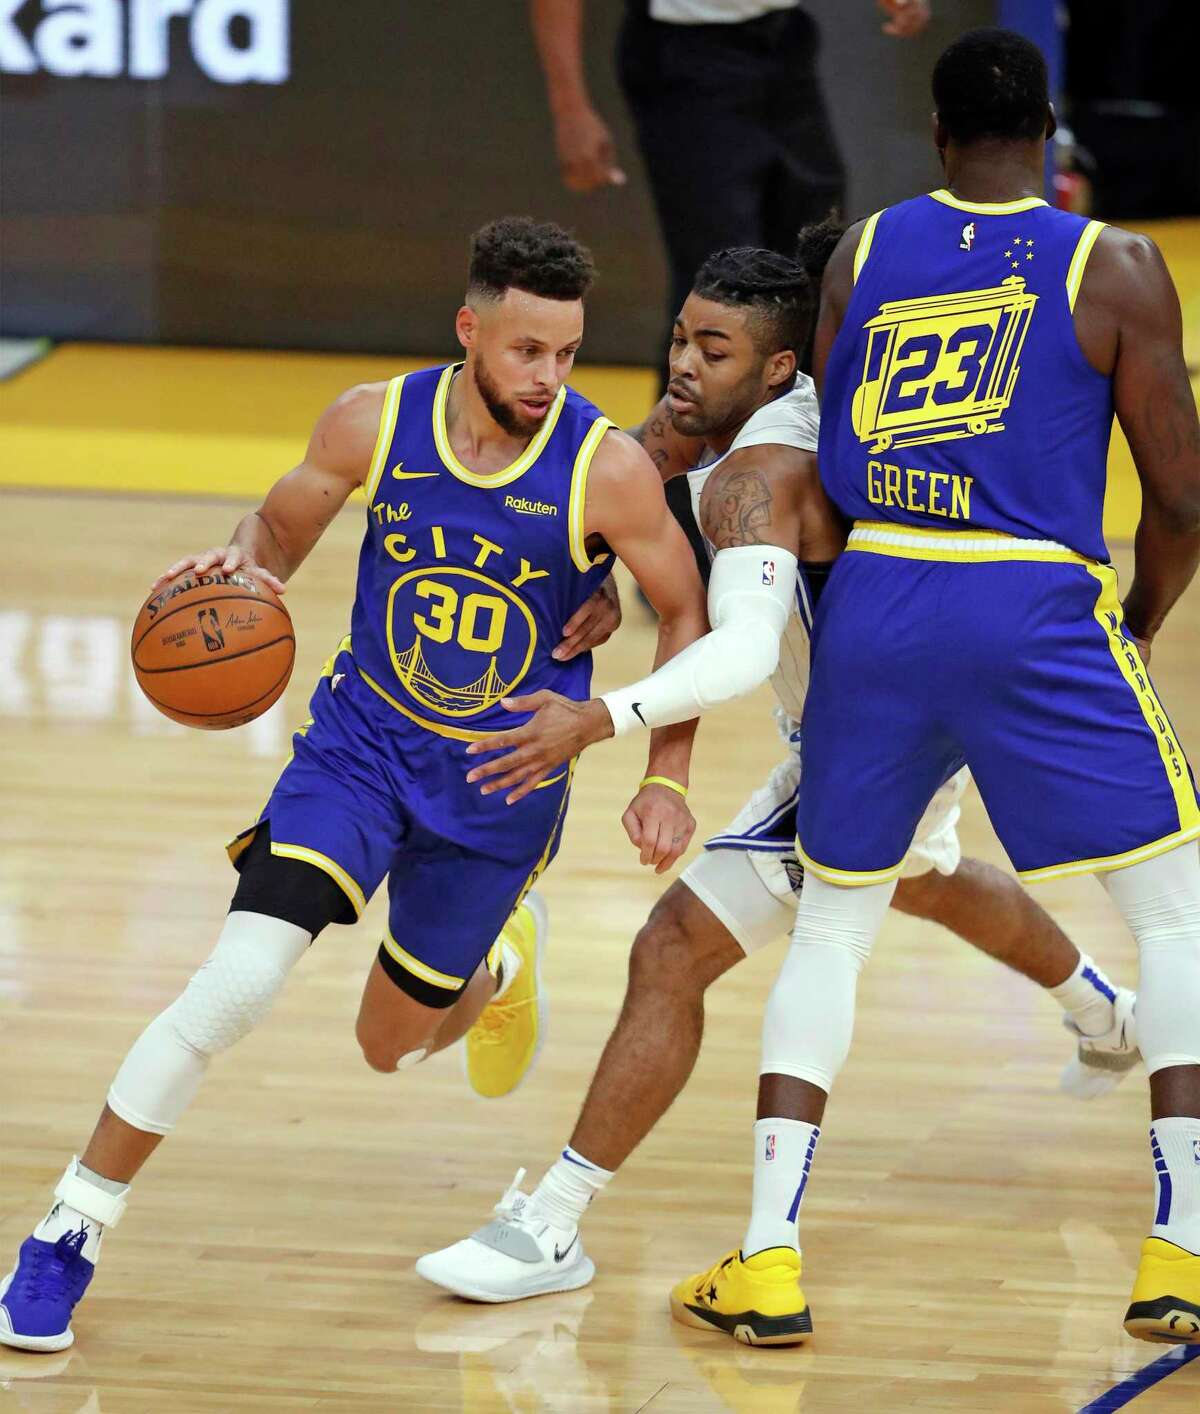 Golden State Warriors' Stephen Curry dribbles as Draymond Green screens Orlando Magic's Frank Mason III in 1st quarter during NBA game at Chase Center in San Francisco, Calif., on Thursday, February 11, 2021.